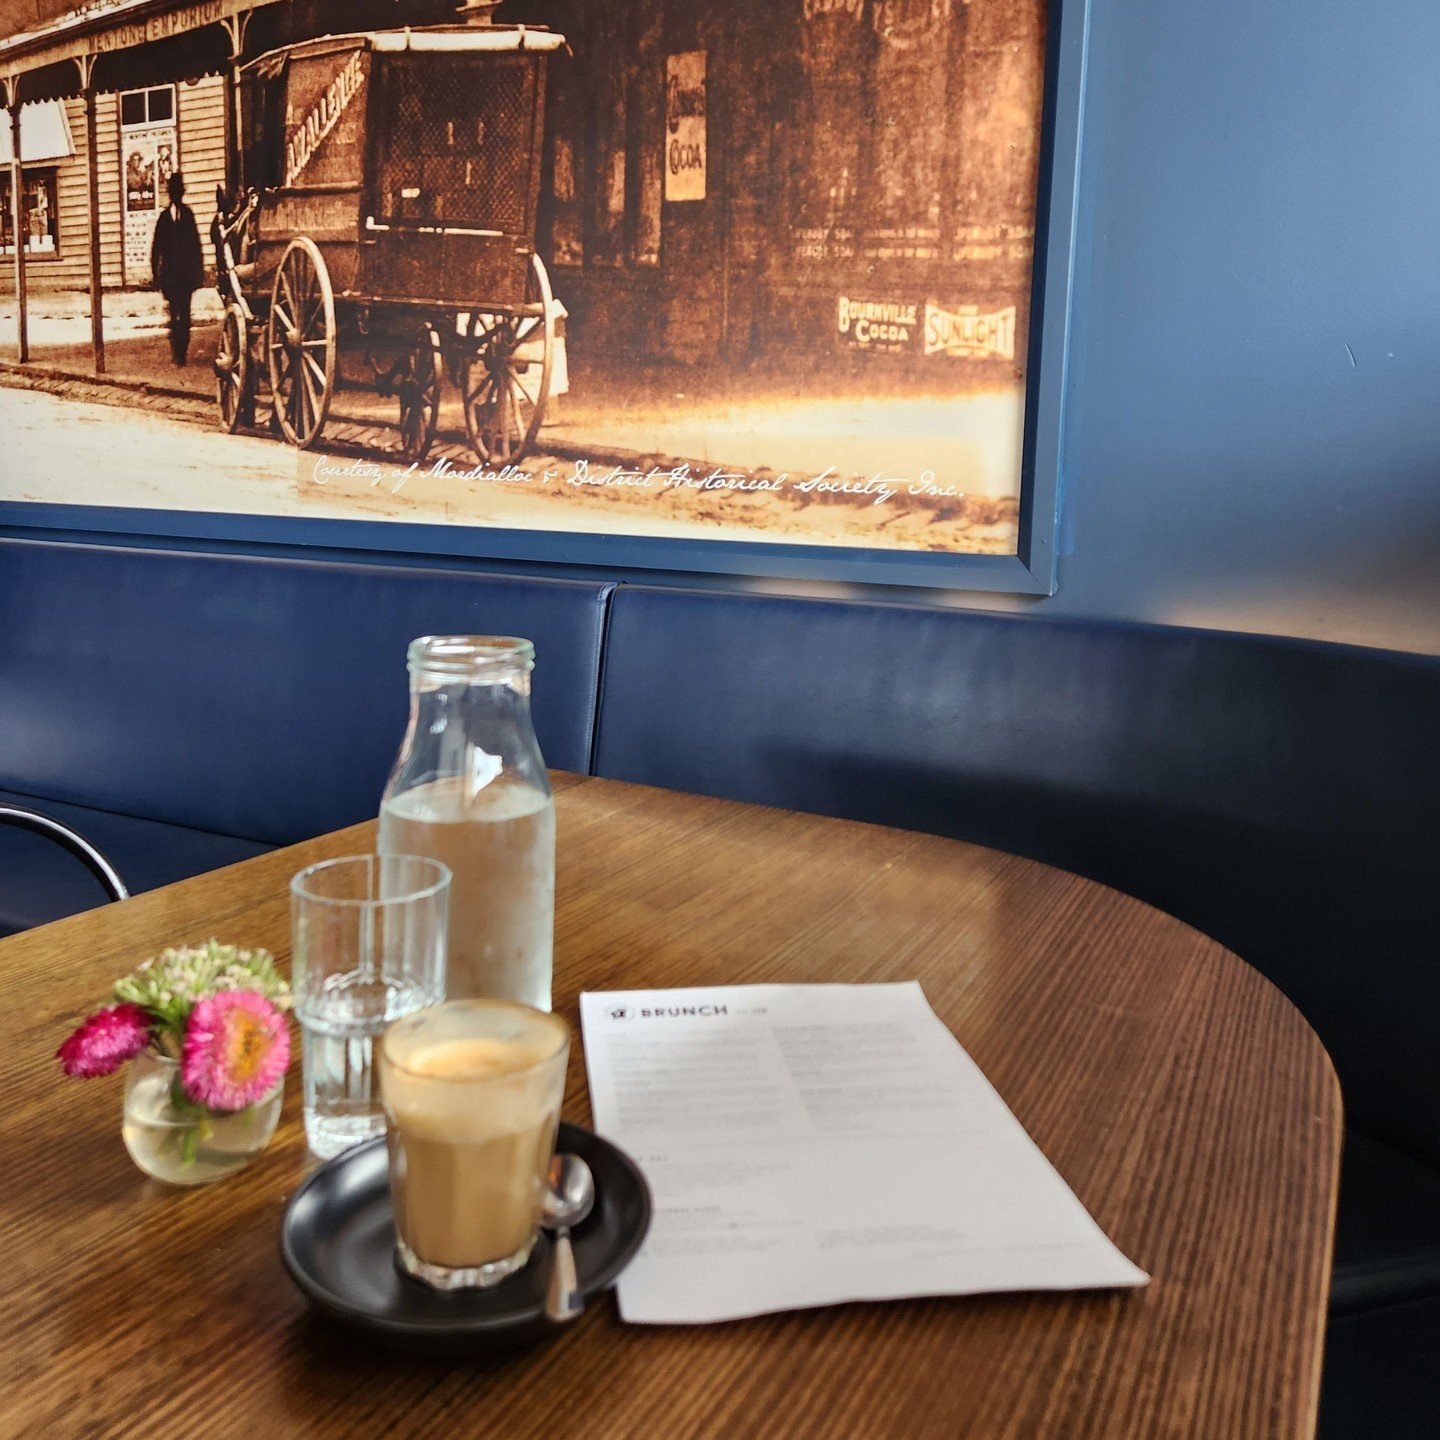 Your perfect wet weather day getaway in Mentone

Cosy. Comfy. And really good coffee!

FREE car park underground, entrance is via Swanston St, then just get the lift up to us from the Basement carpark 😎